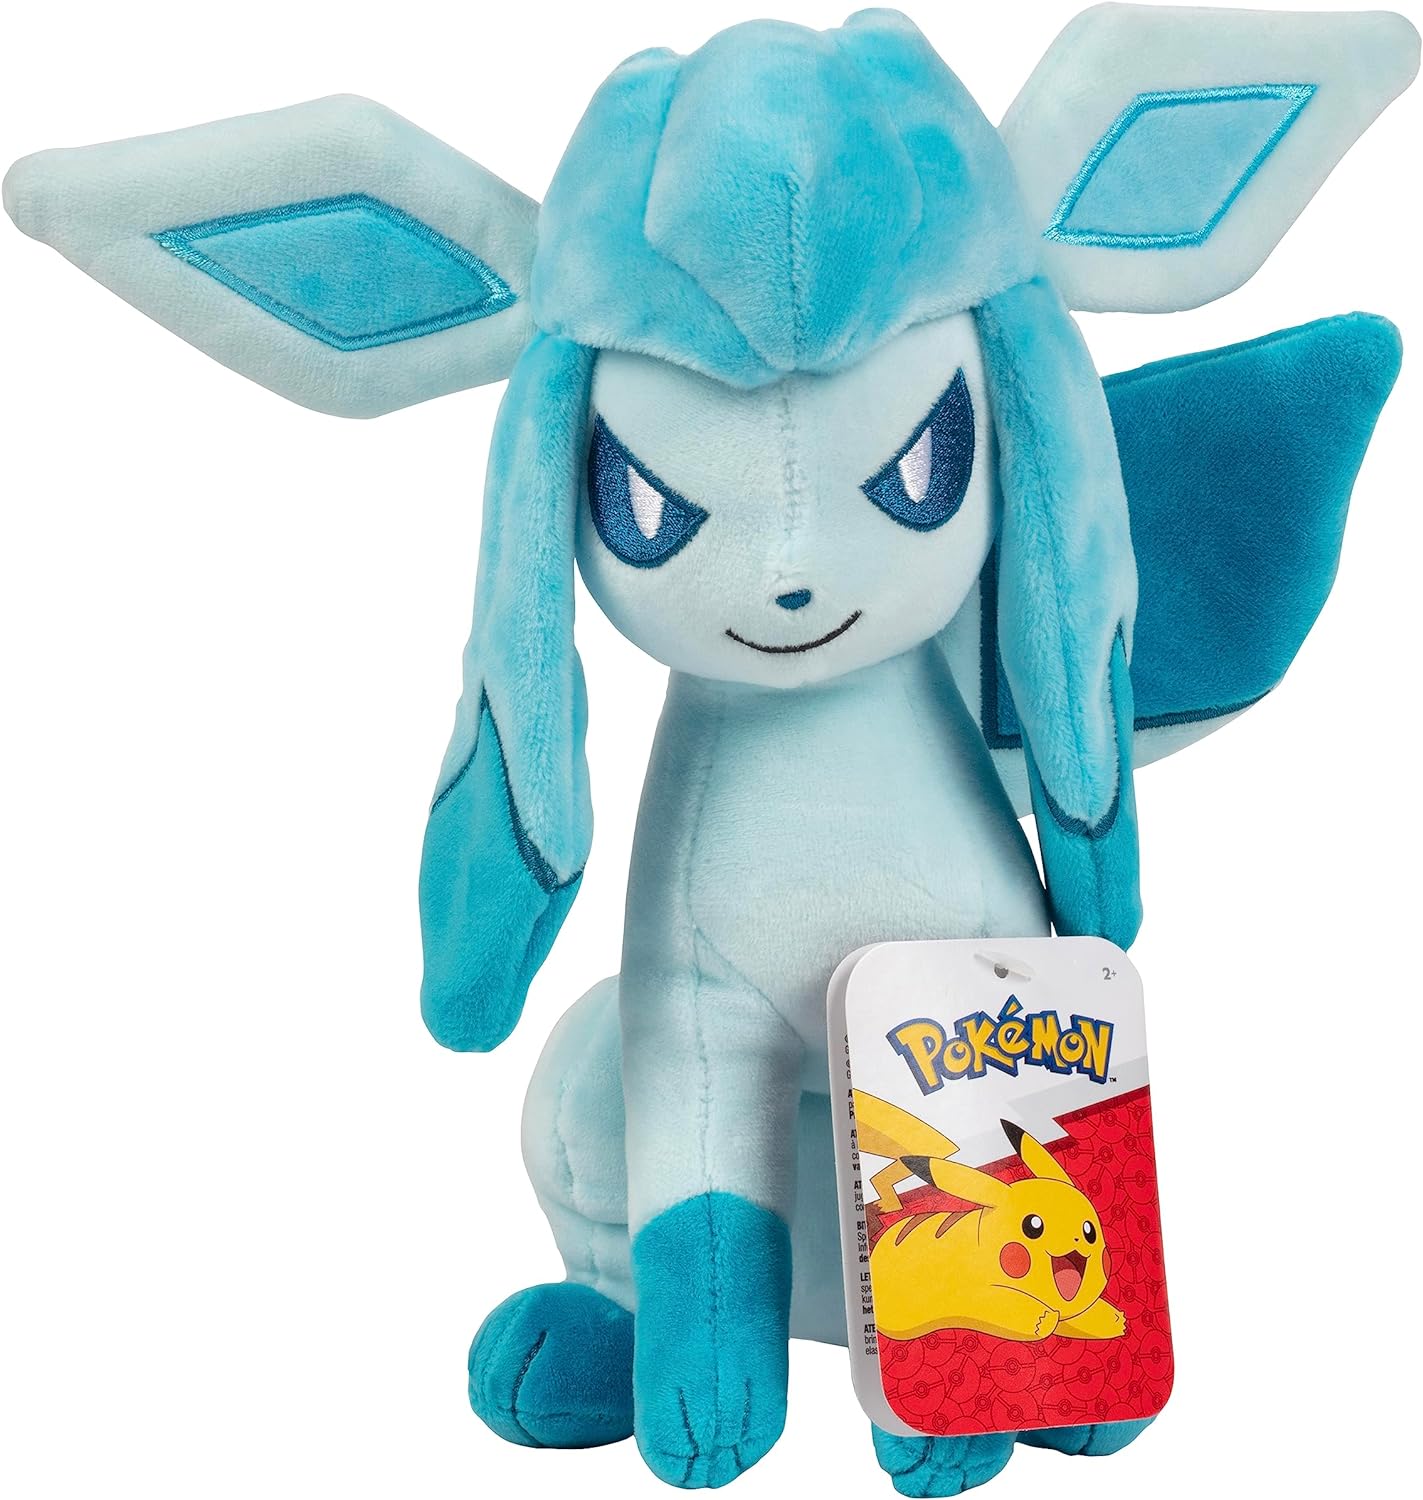 Pokémon 8″ Glaceon Plush – Officially Licensed – Quality & Soft Stuffed Animal Toy – Eevee Evolution – Add Glaceon to Your Collection! – Great Gift for Kids & Fans of Pokemon